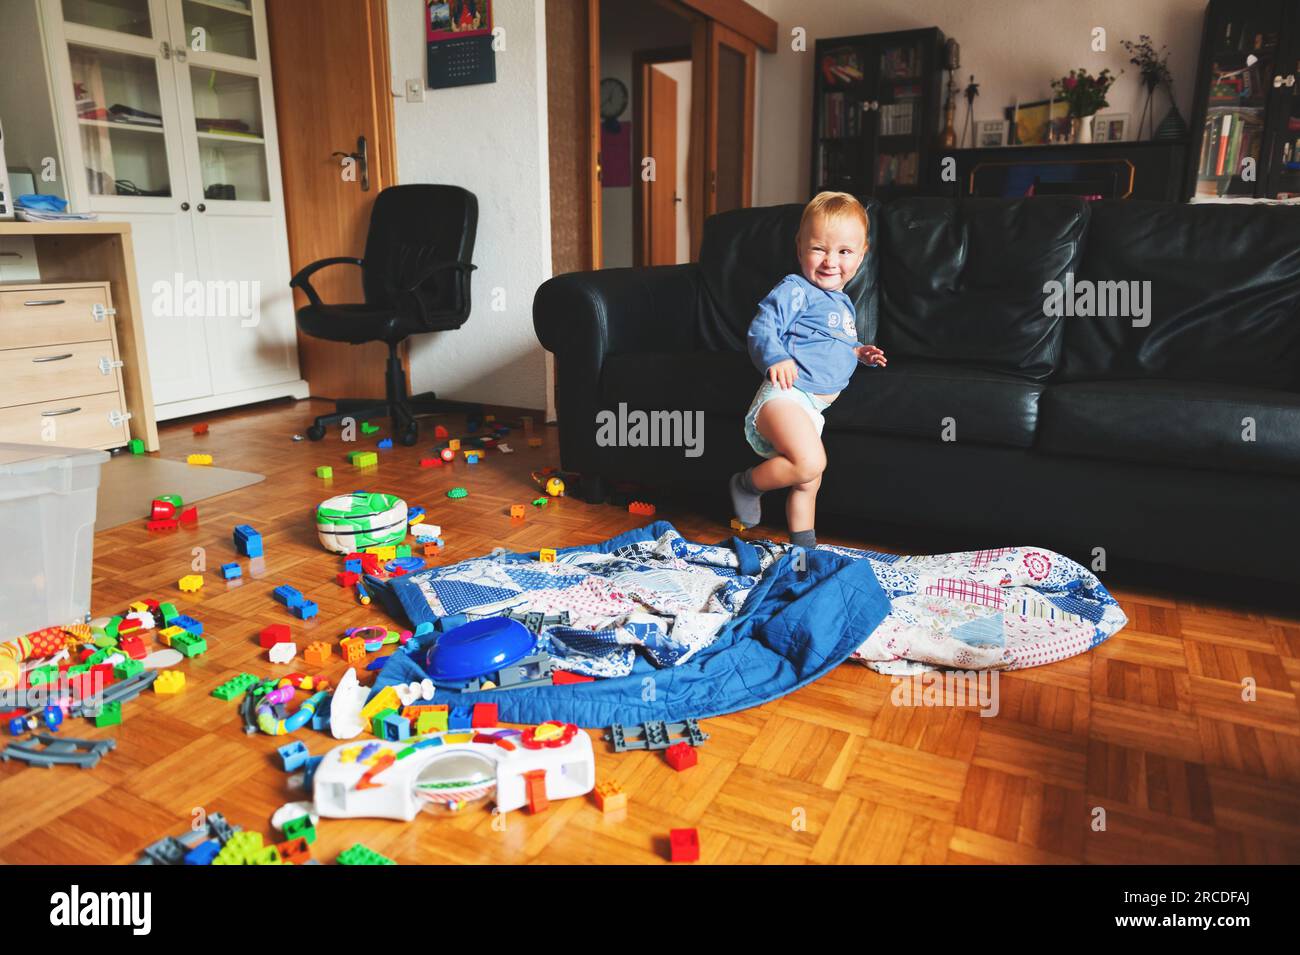 Adorable 1 year old baby boy with funny facial expression playing in a very messy living room Stock Photo